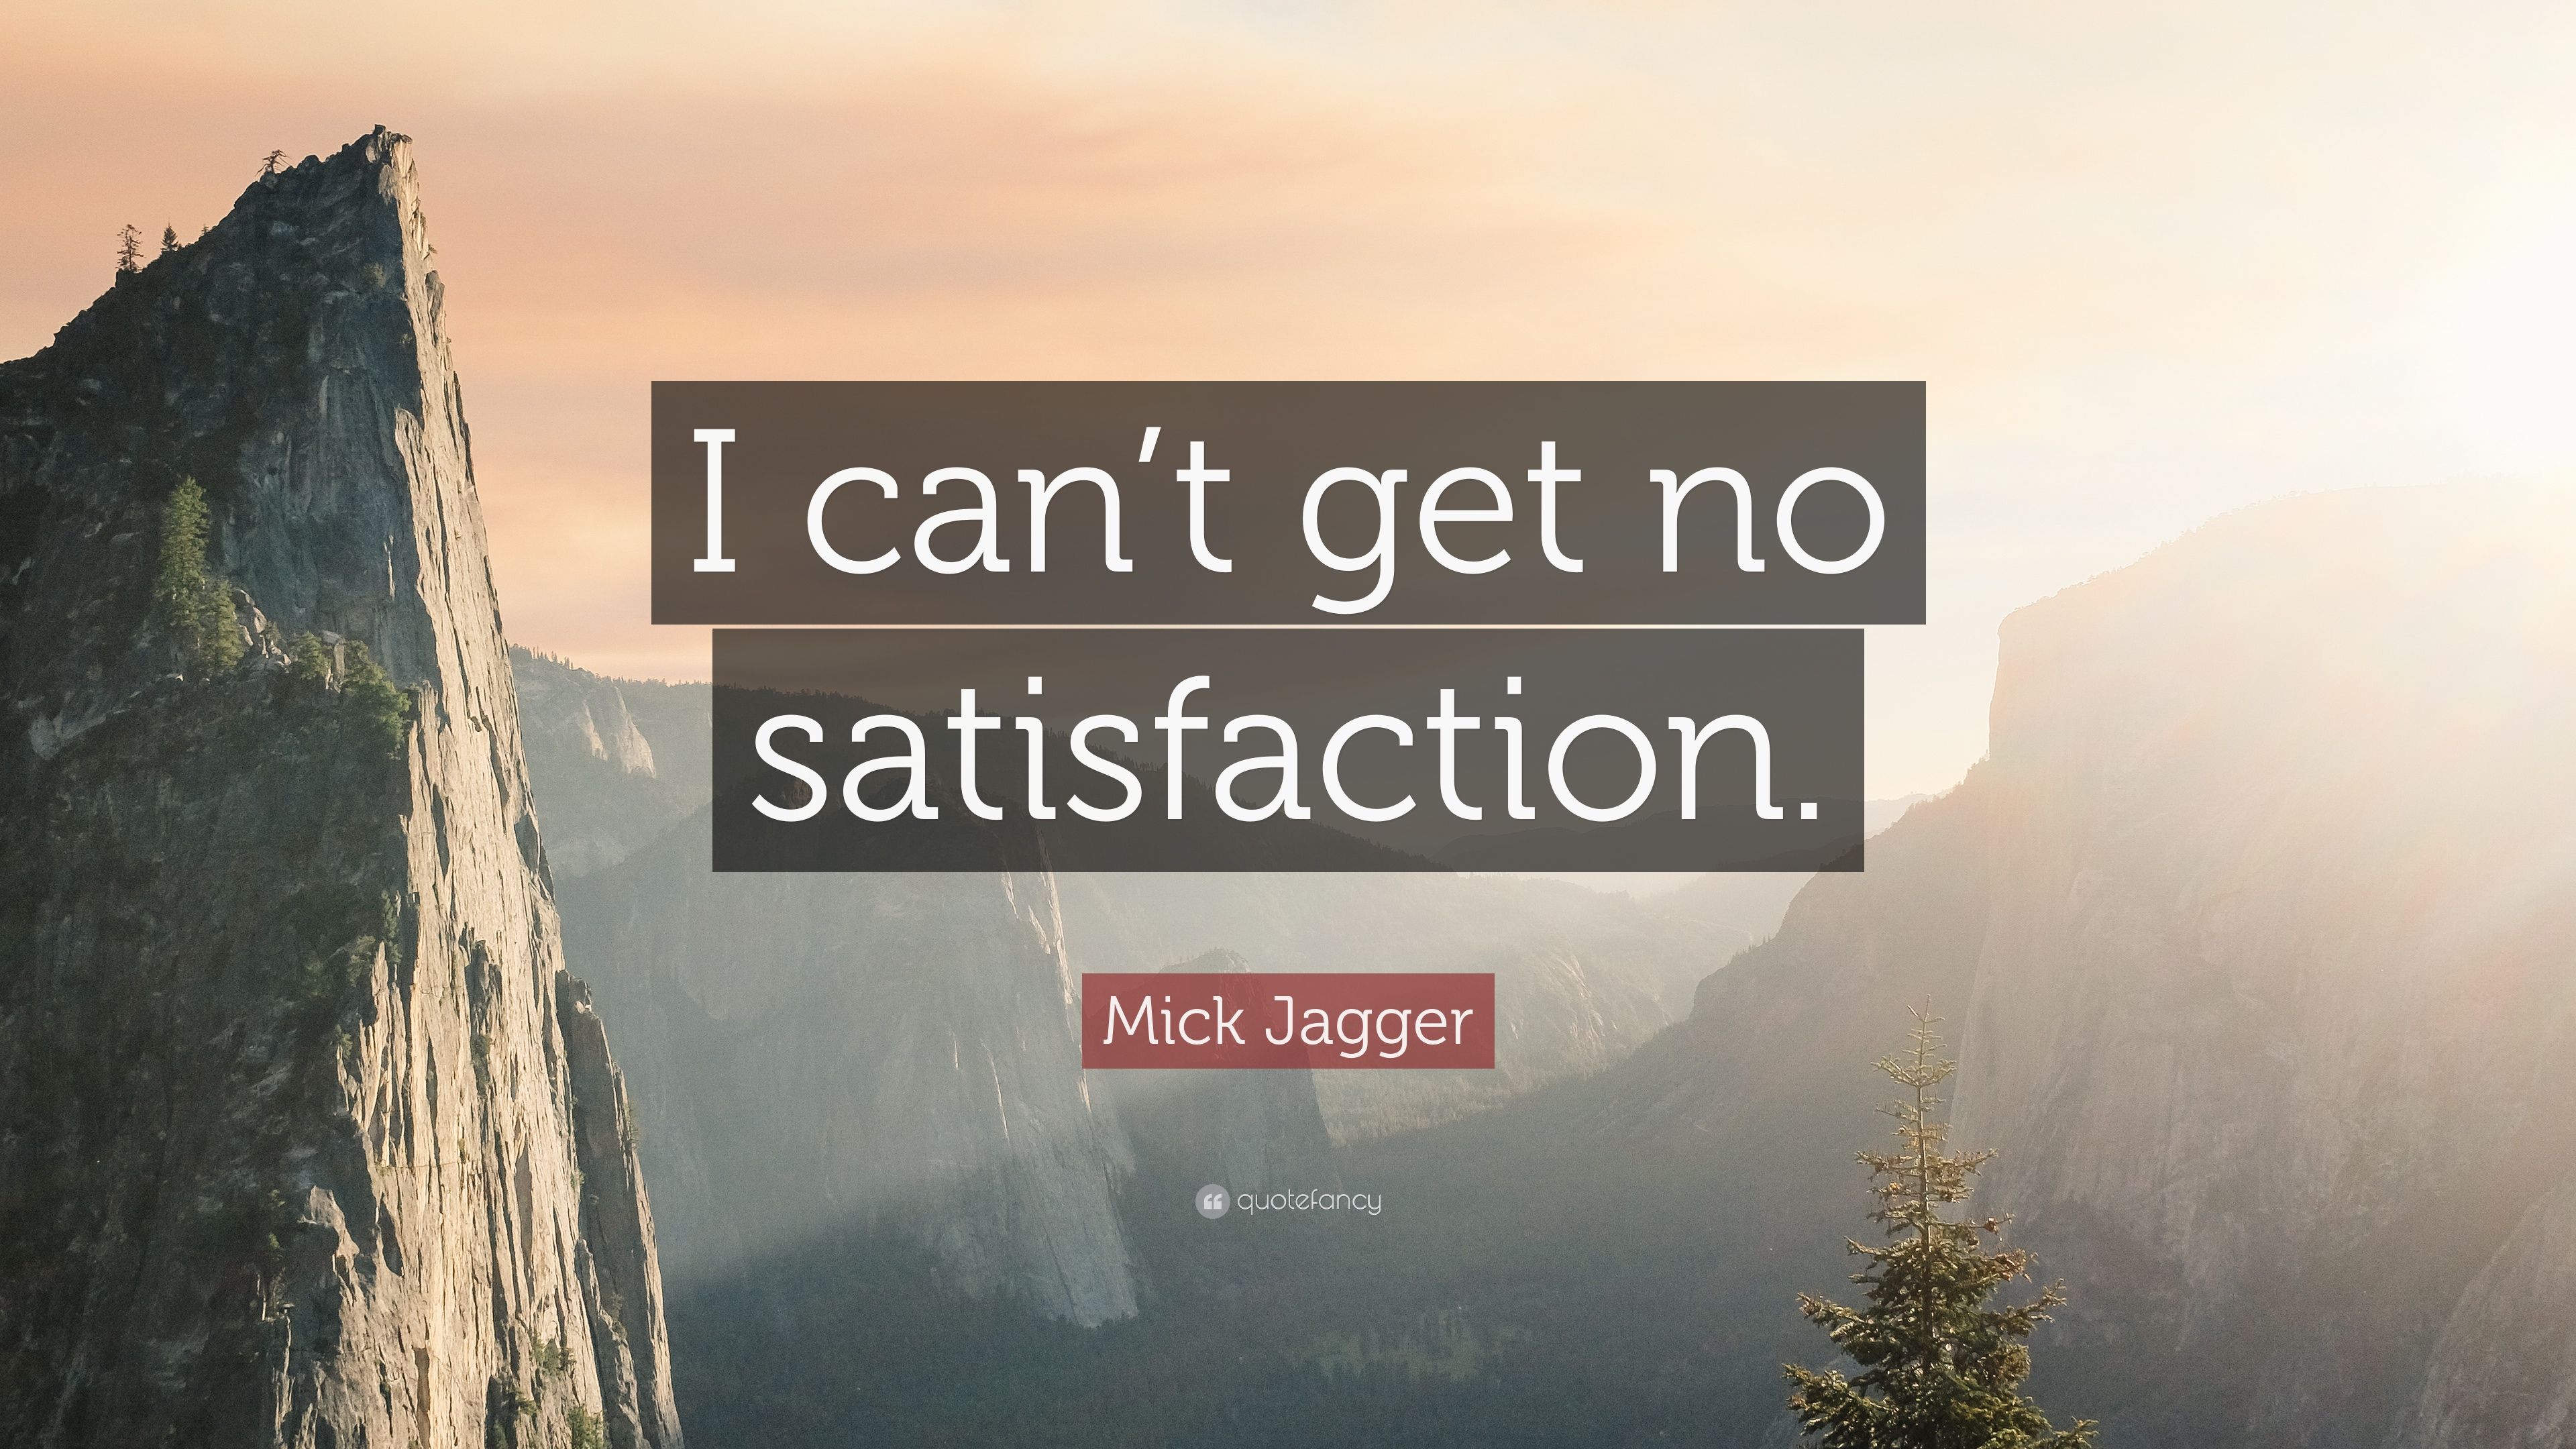 Mick Jagger Quote: “I can't get no satisfaction.” (7 wallpaper)